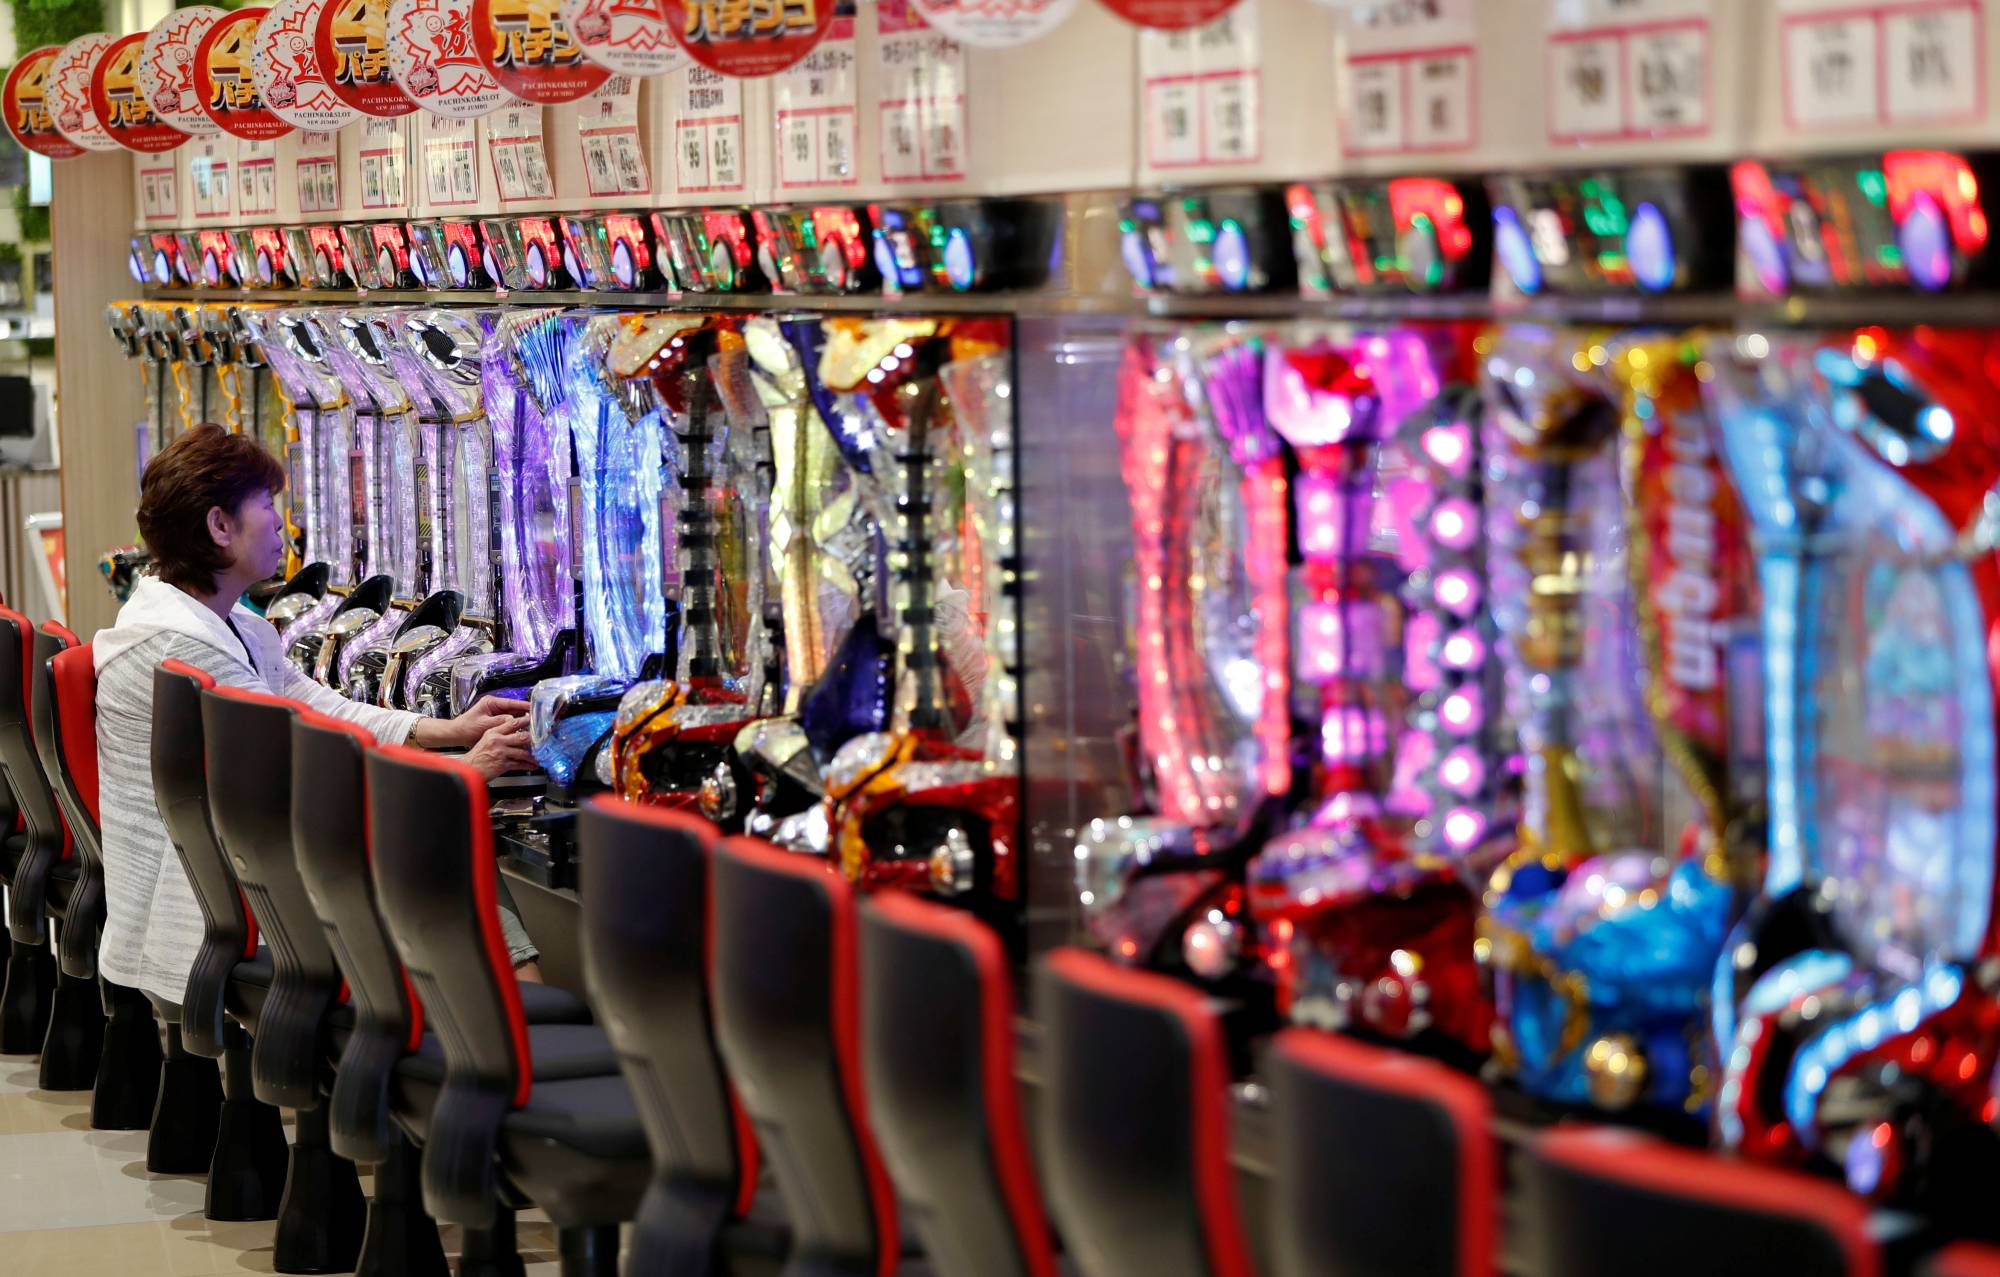 What's the relationship between Pachinko and Japanese sports?